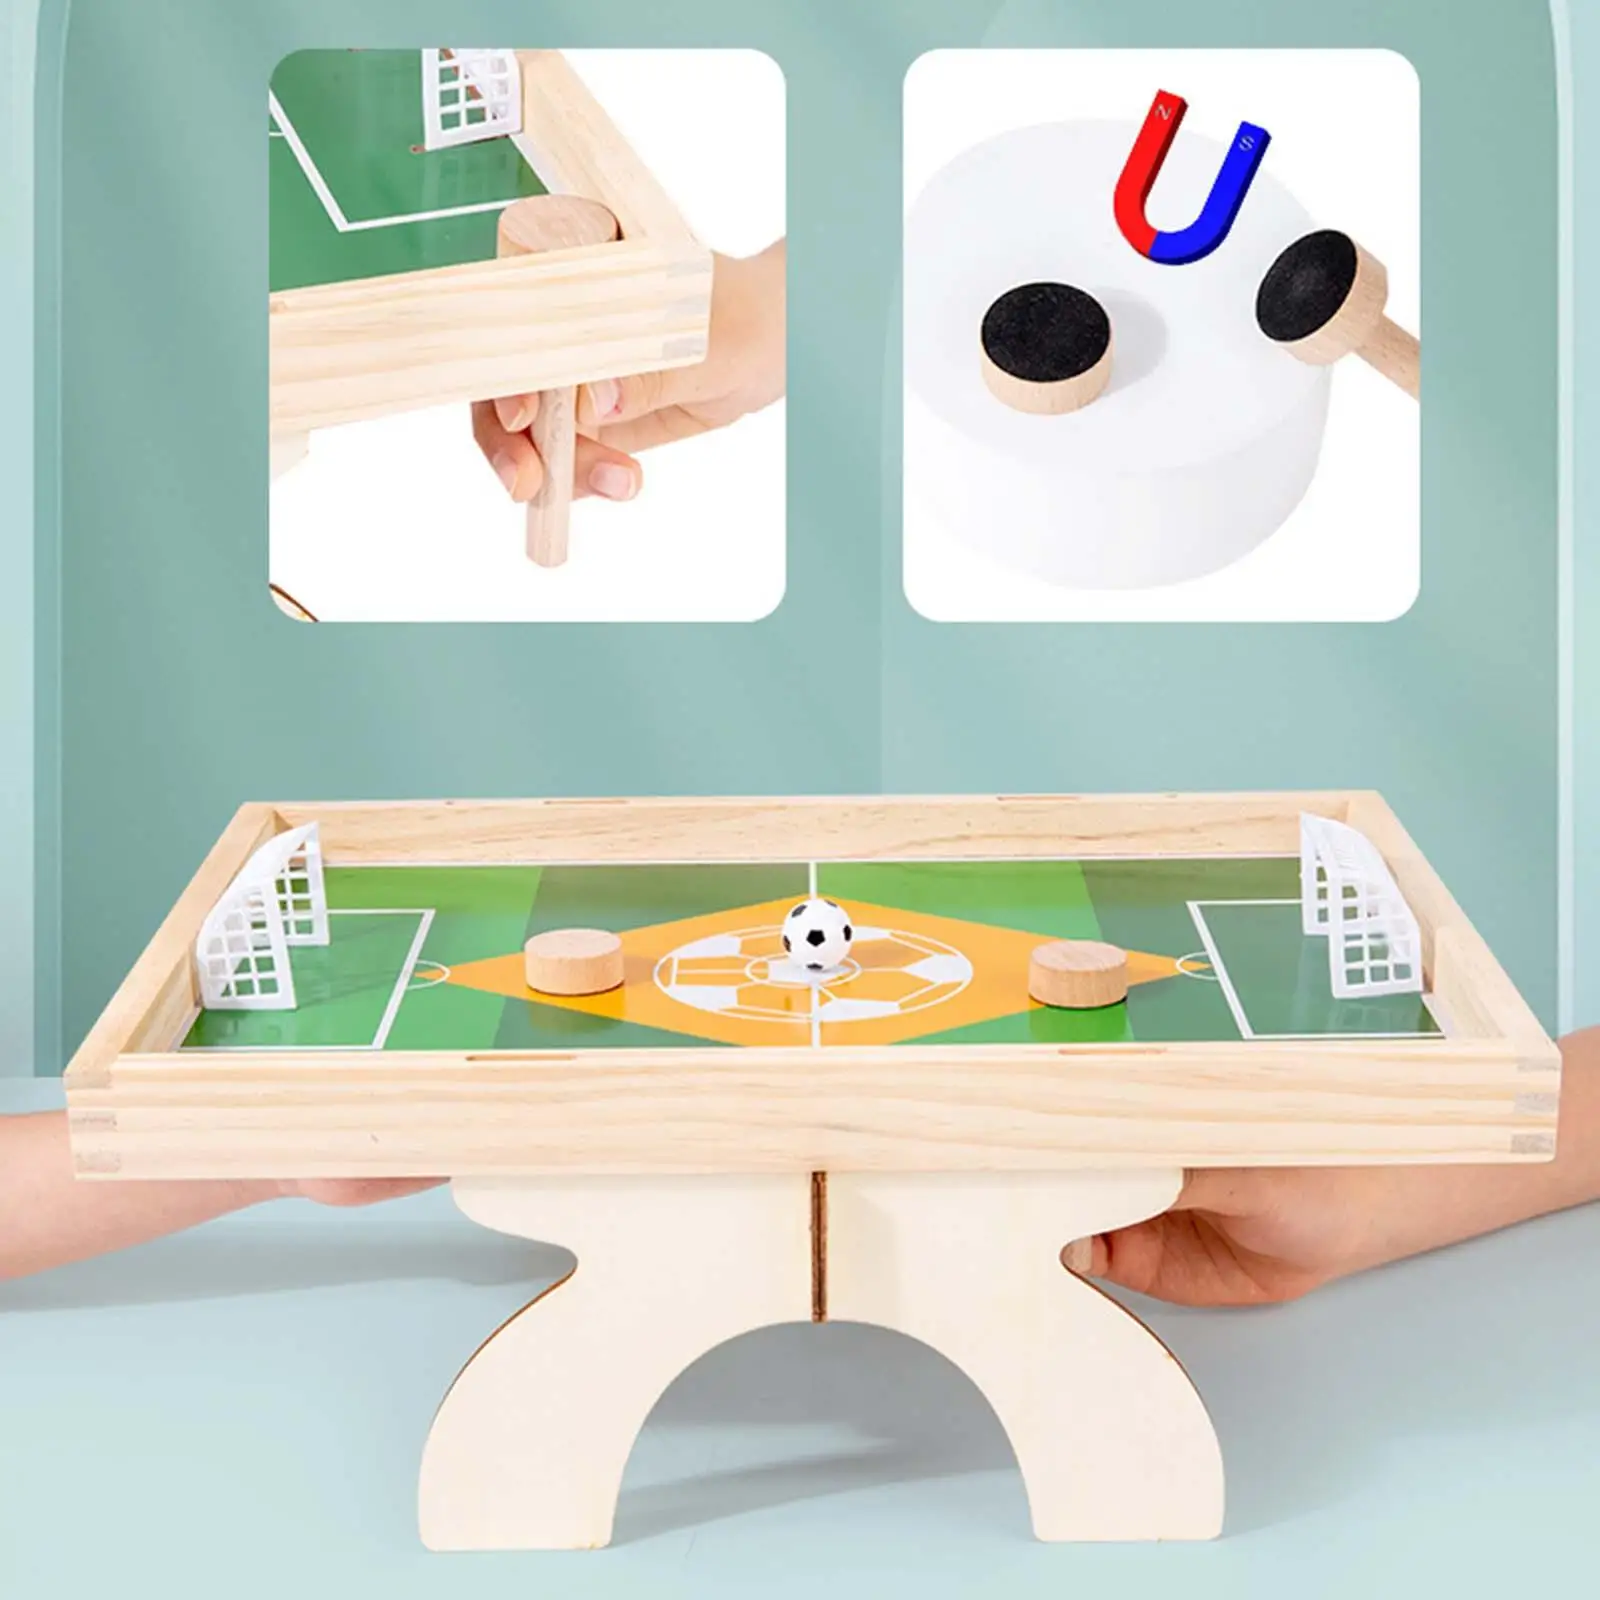 Small Table Football Game Flying Chess  Soccer for Adults Kids